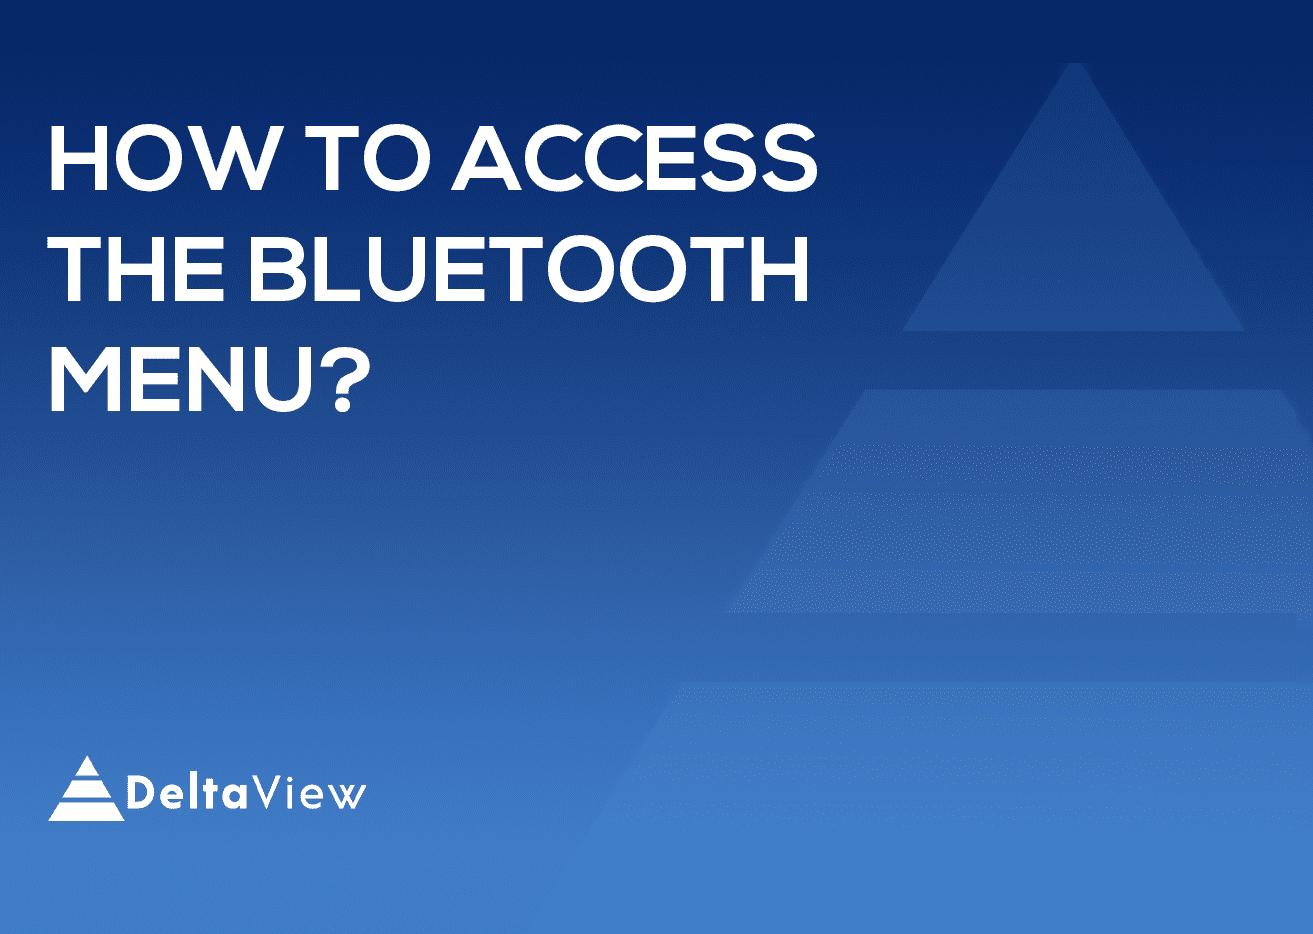 How to access the Bluetooth menu?